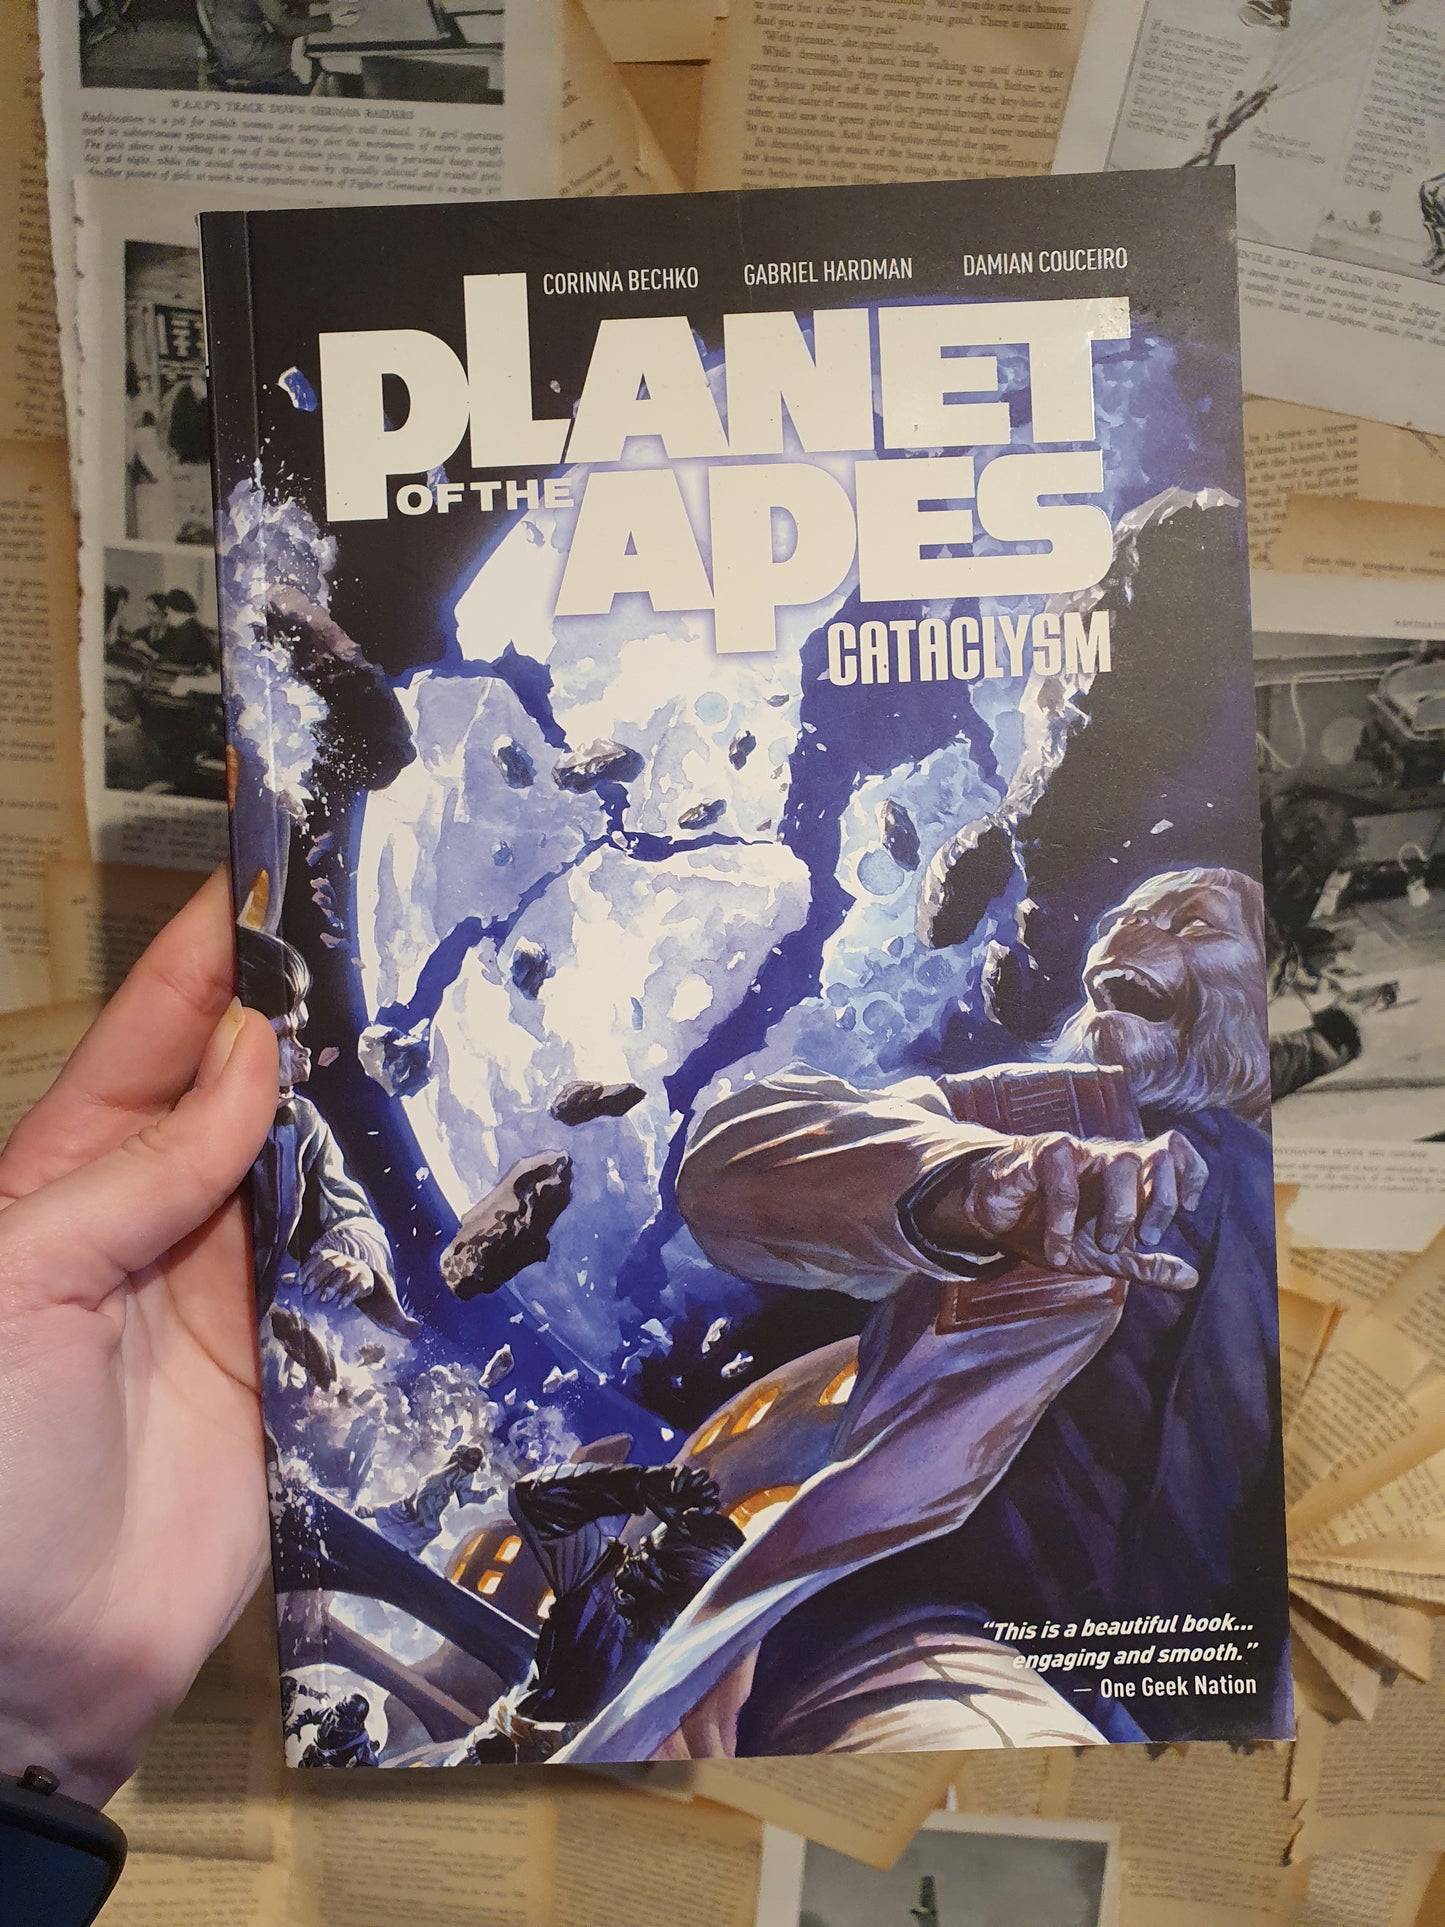 Planet of the Apes Cataclysm vol 2 by Bechko, Hardman ... (2013)